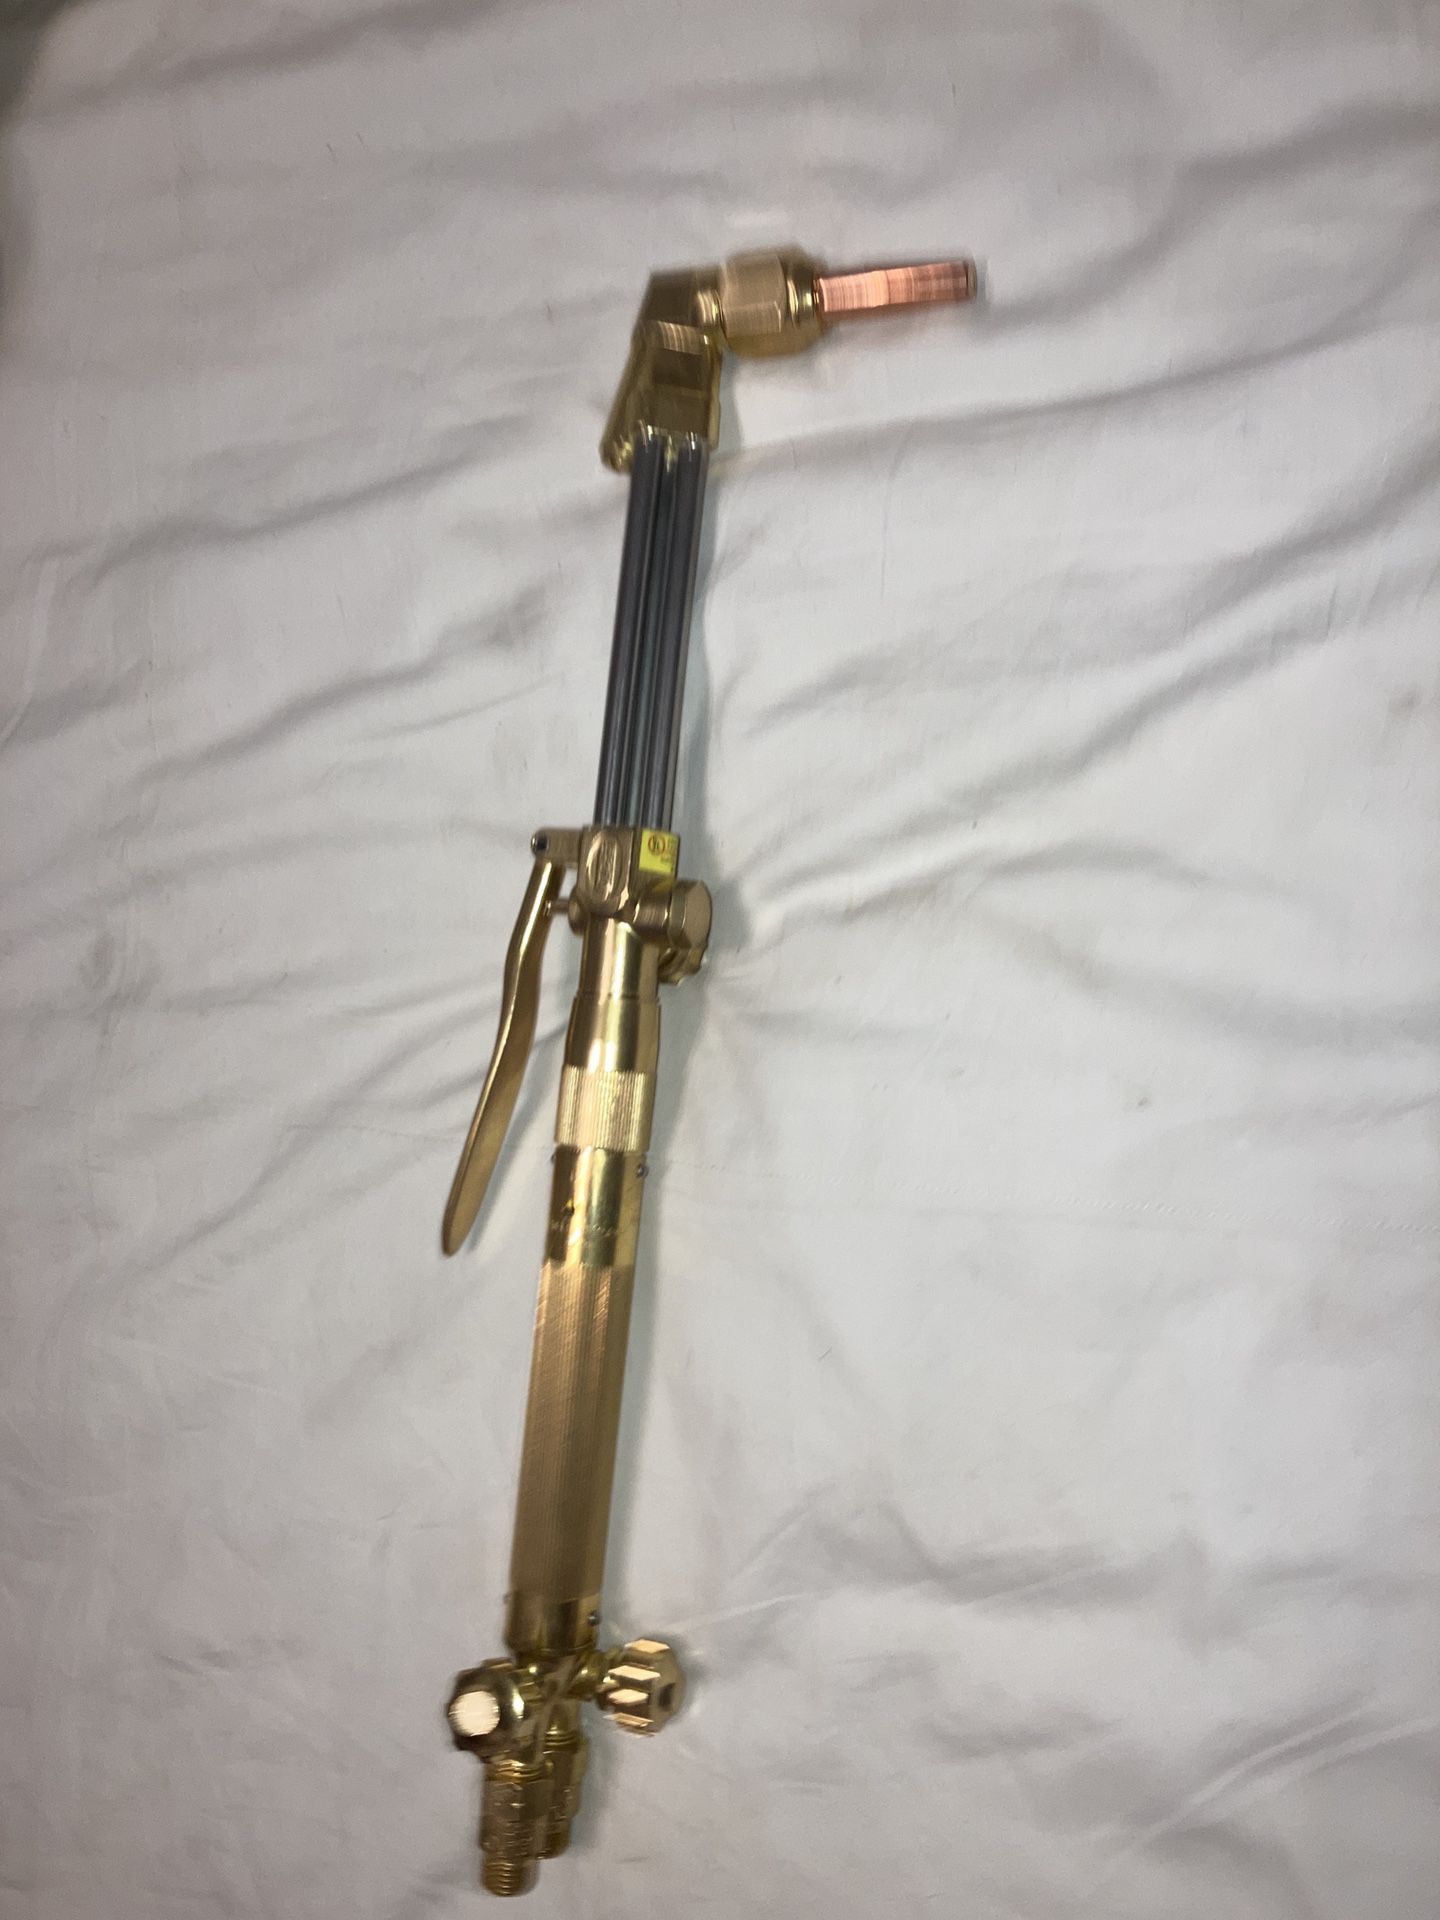 Acetylene Torch New Never Used